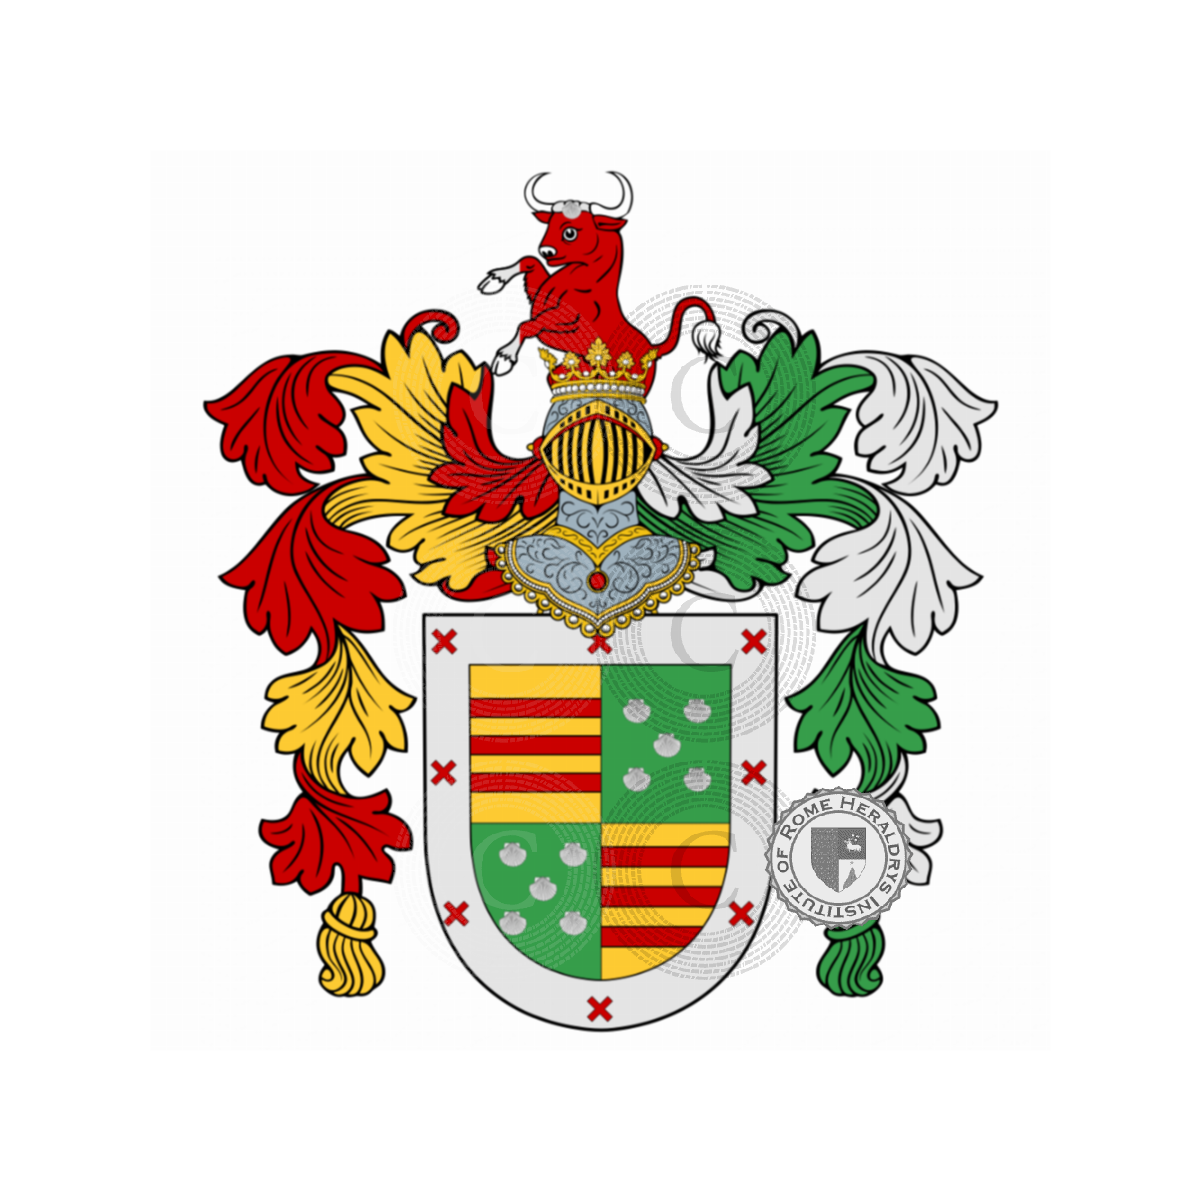 Coat of arms of familyPimentel, Alonso Pimentel